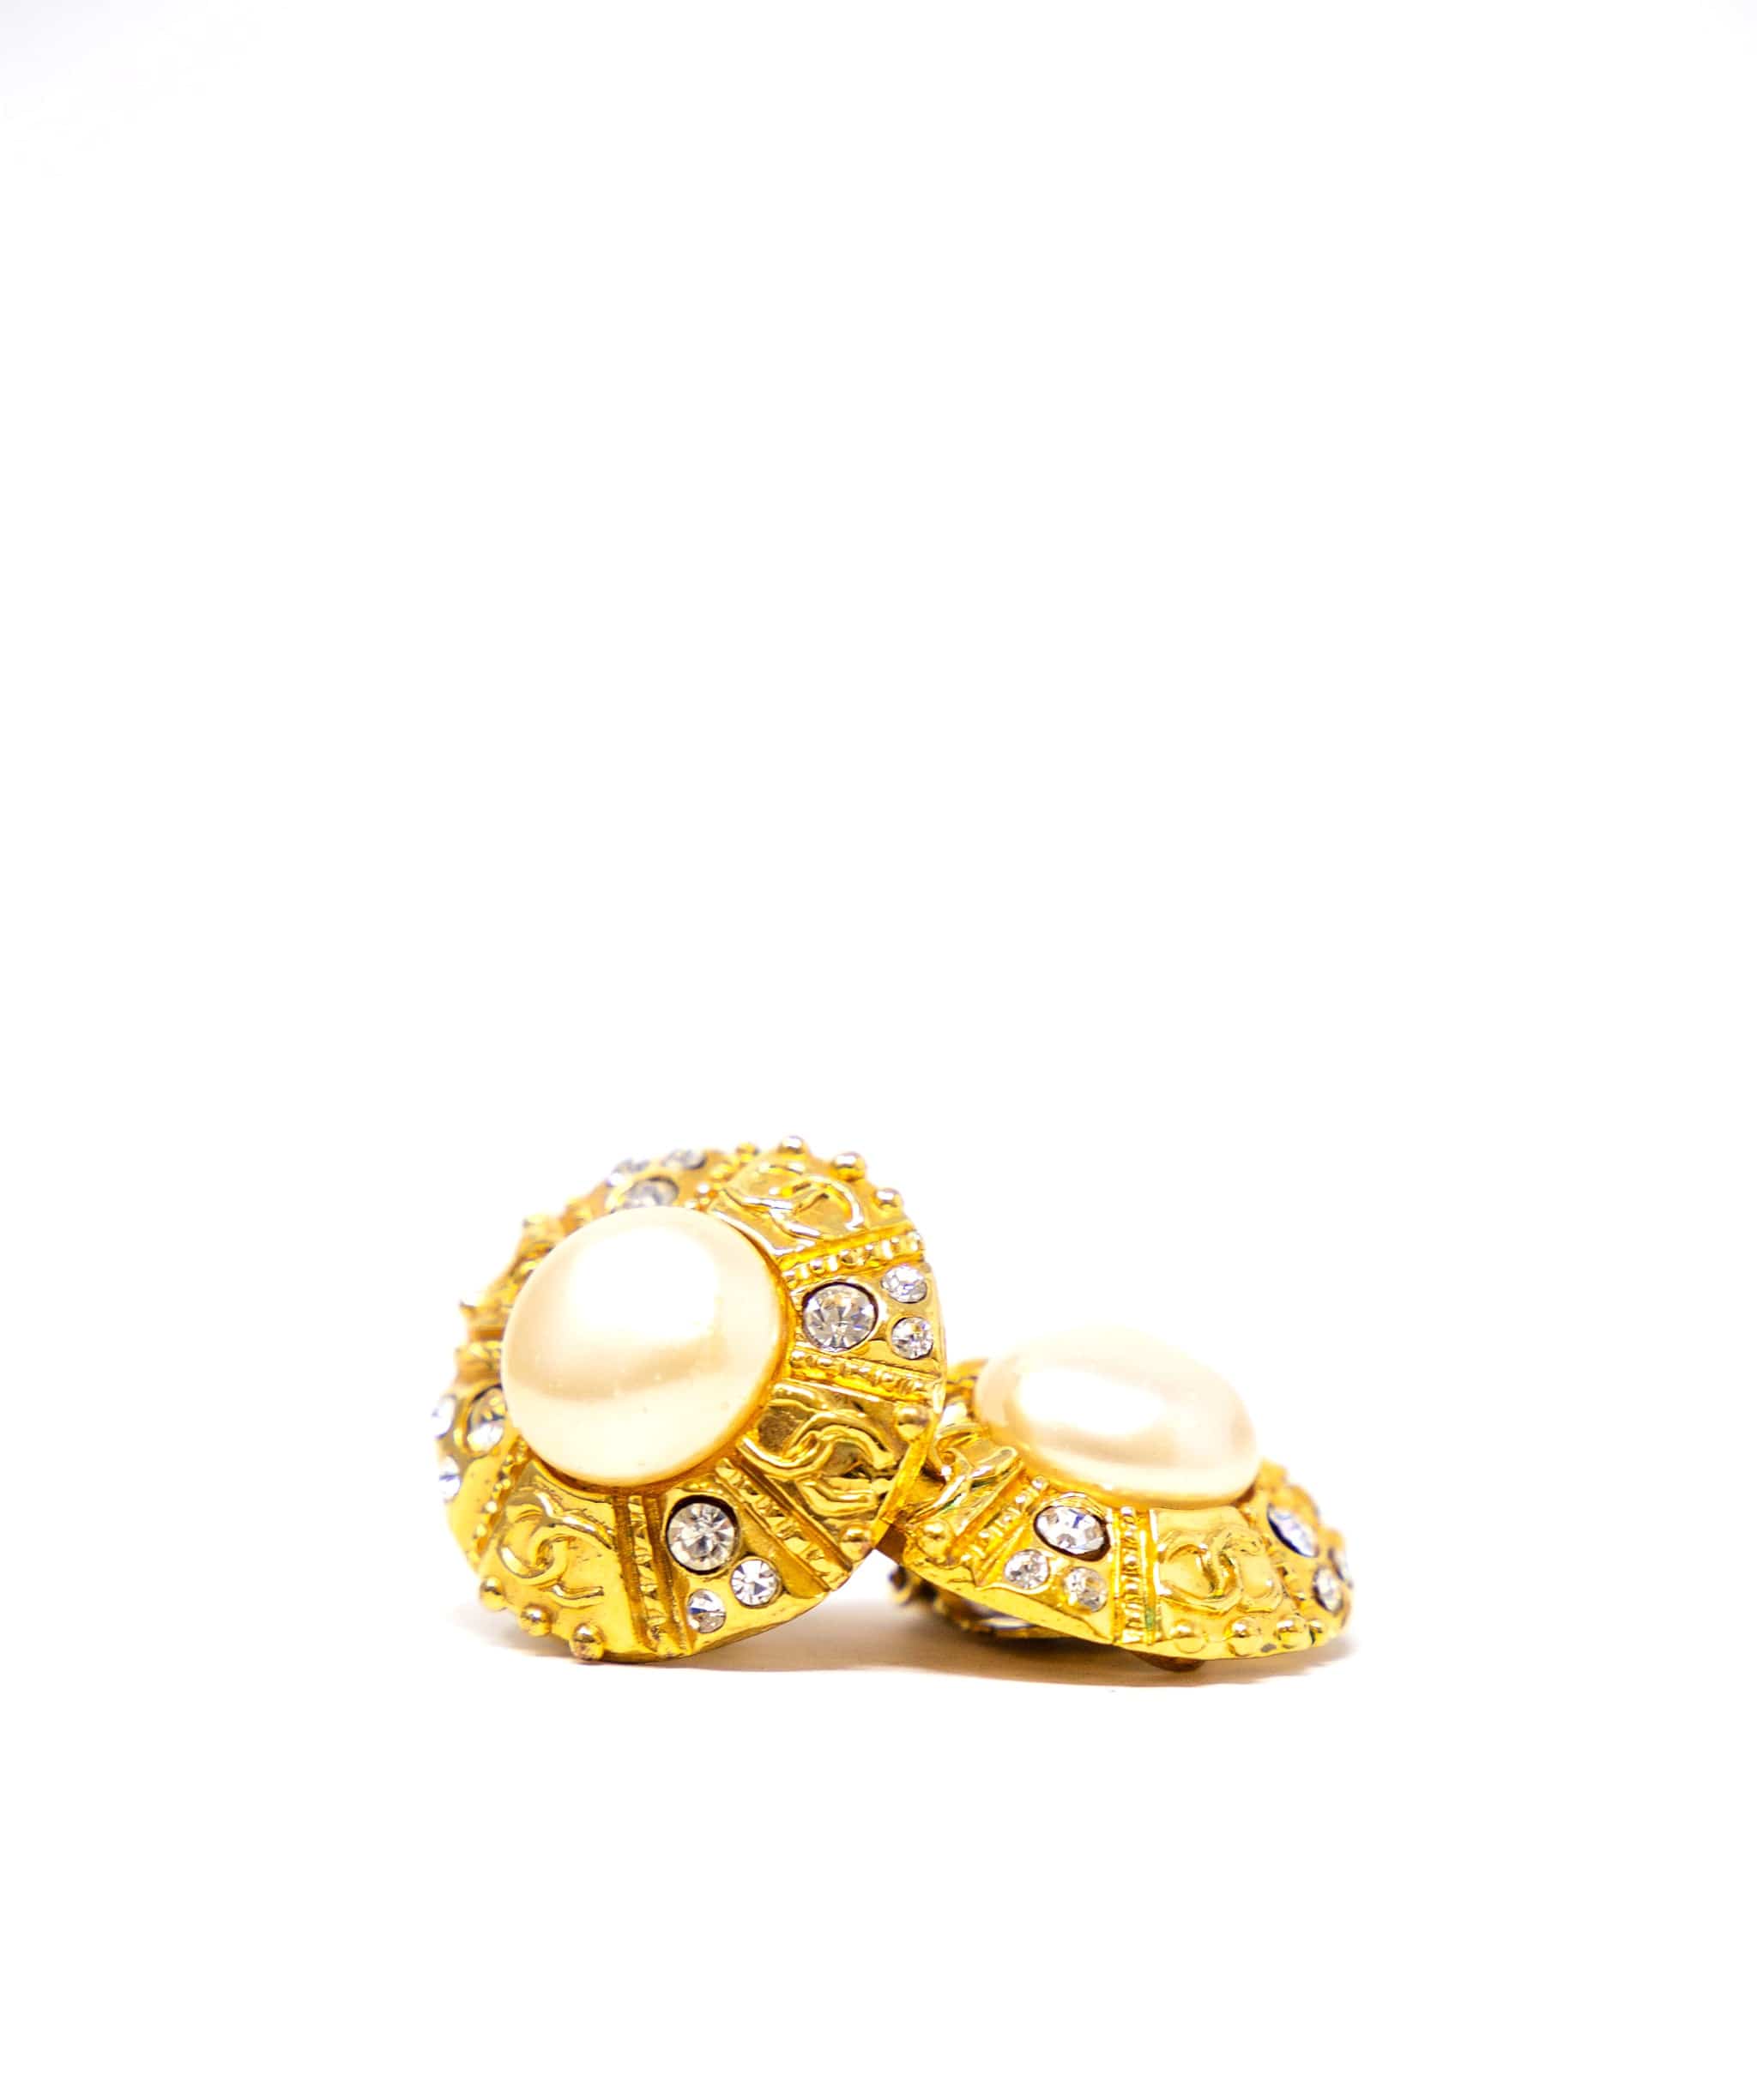 Chanel Chanel Pearl and Gold Vintage Clip Earrings - AGL2069